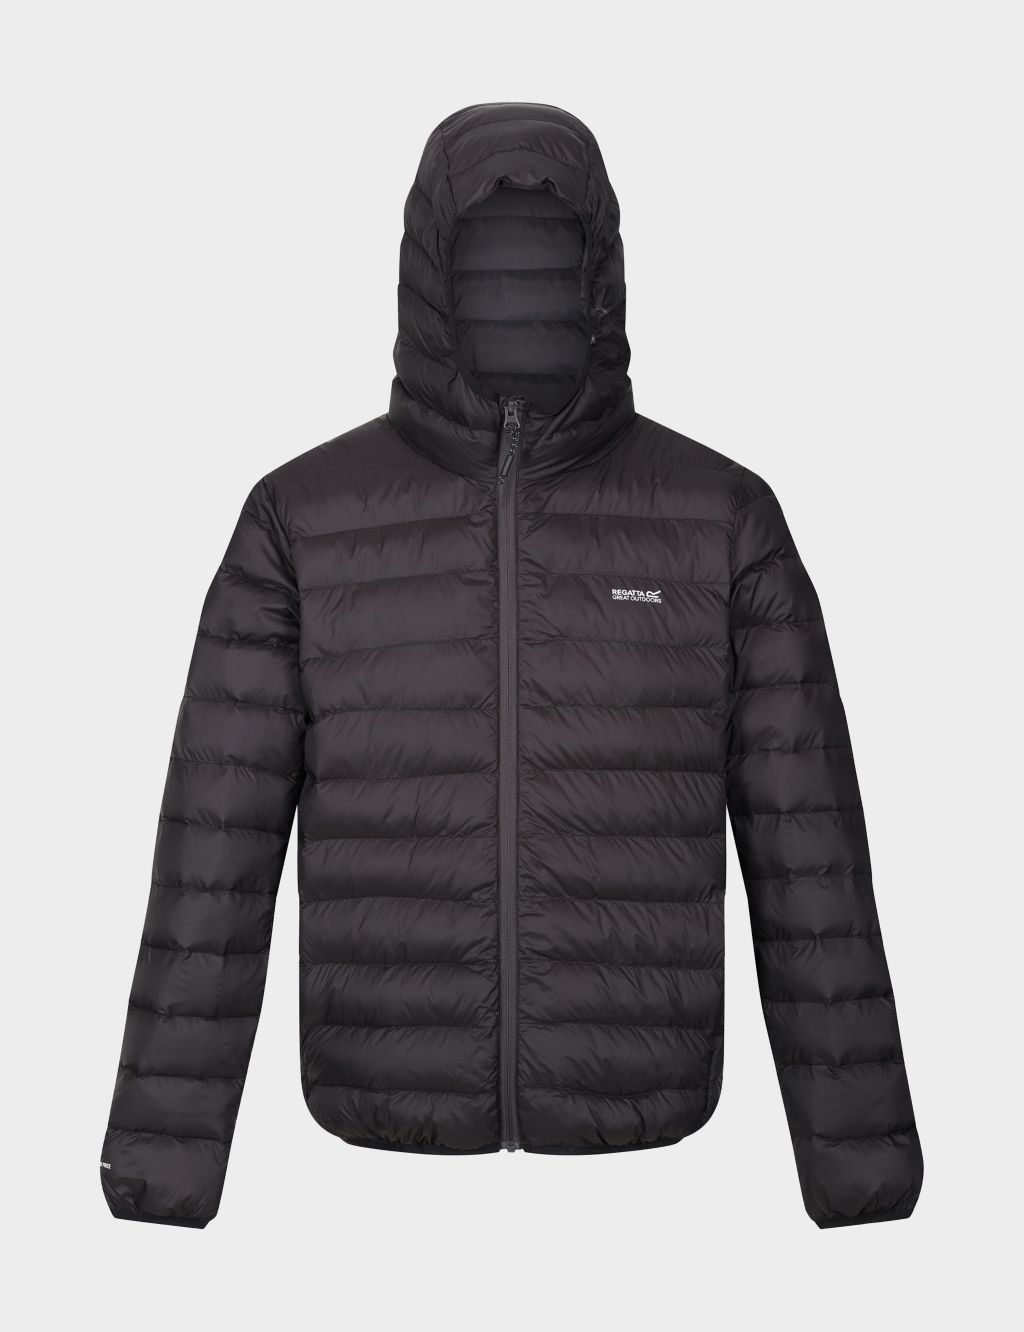 Marizion Water-Repellent Puffer Jacket image 2